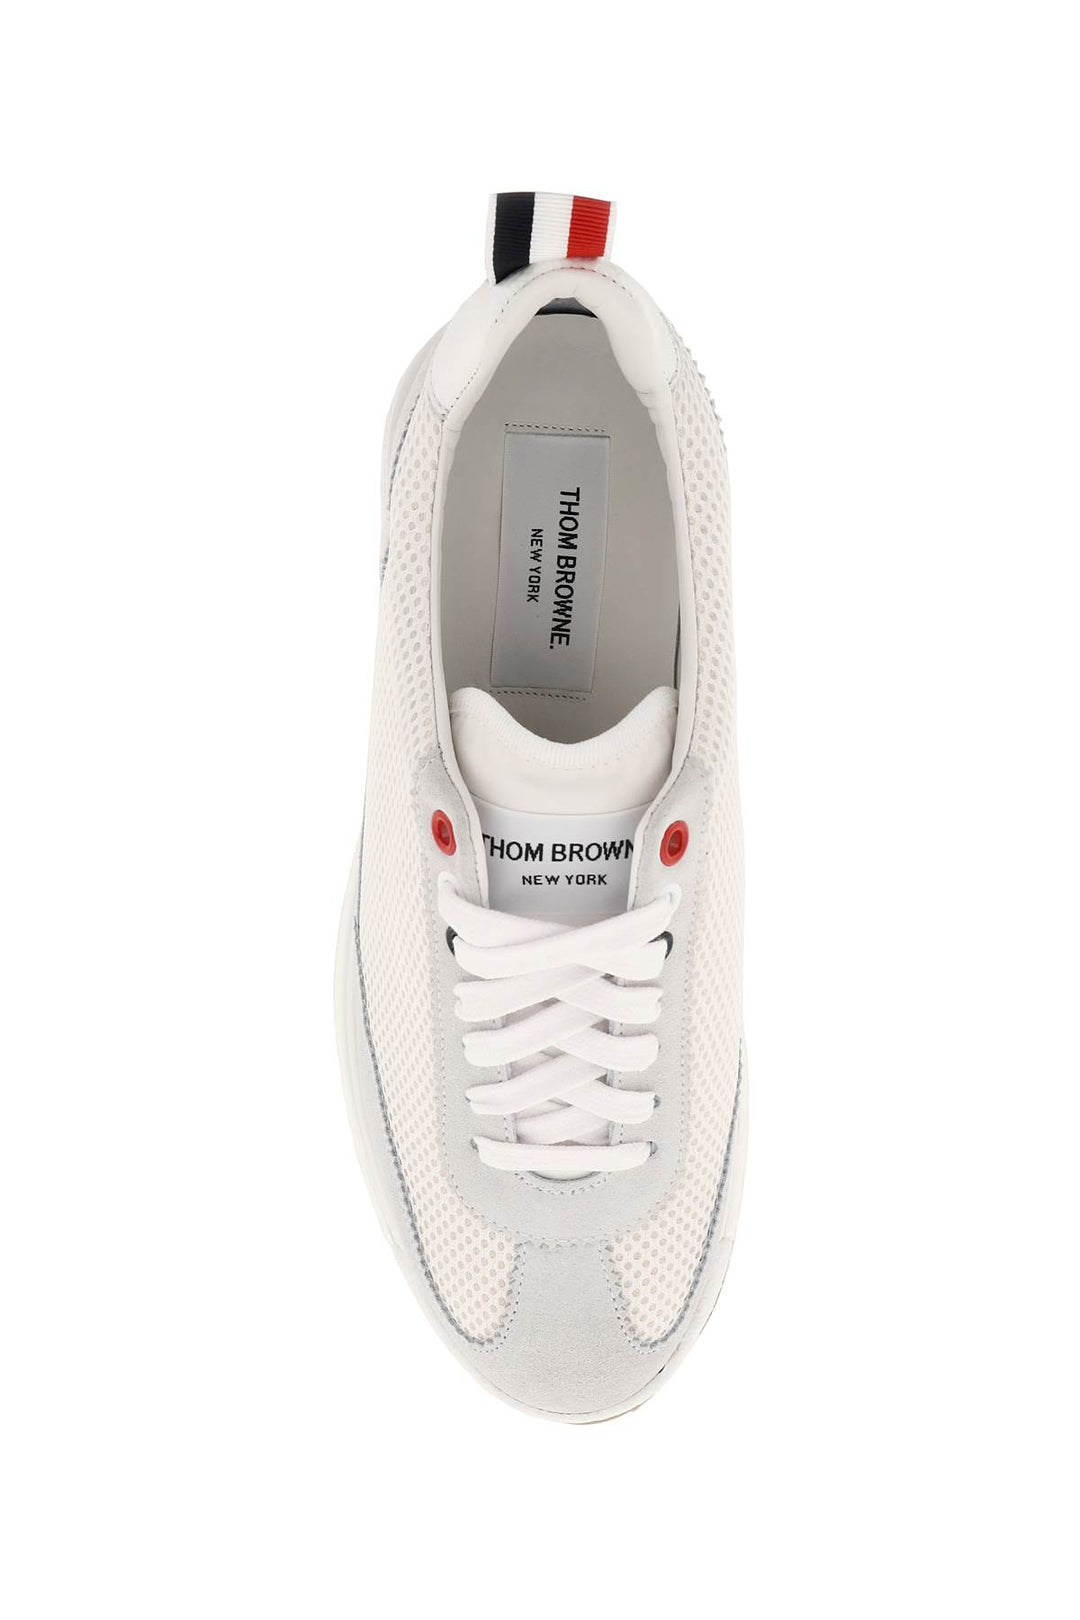 Thom Browne Tech Runner Sneakers   White